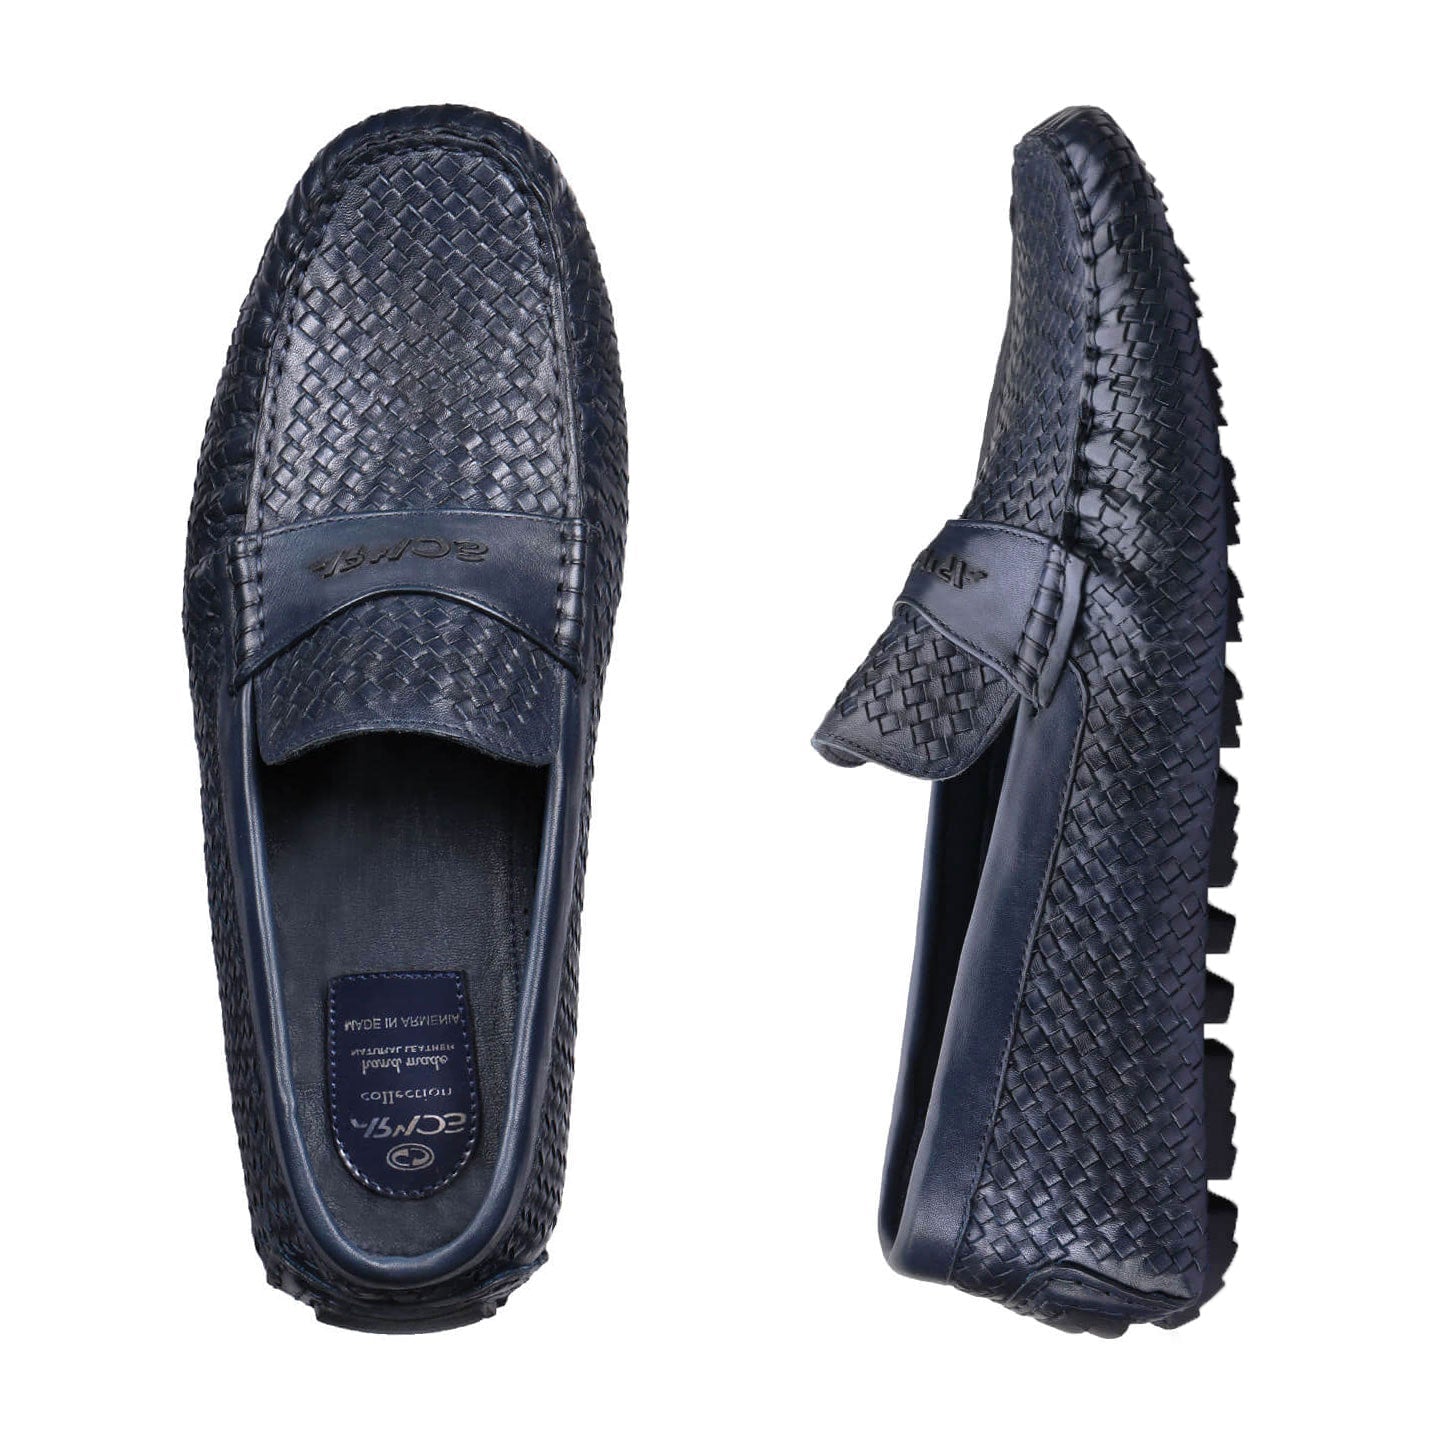 Blue woven moccasins